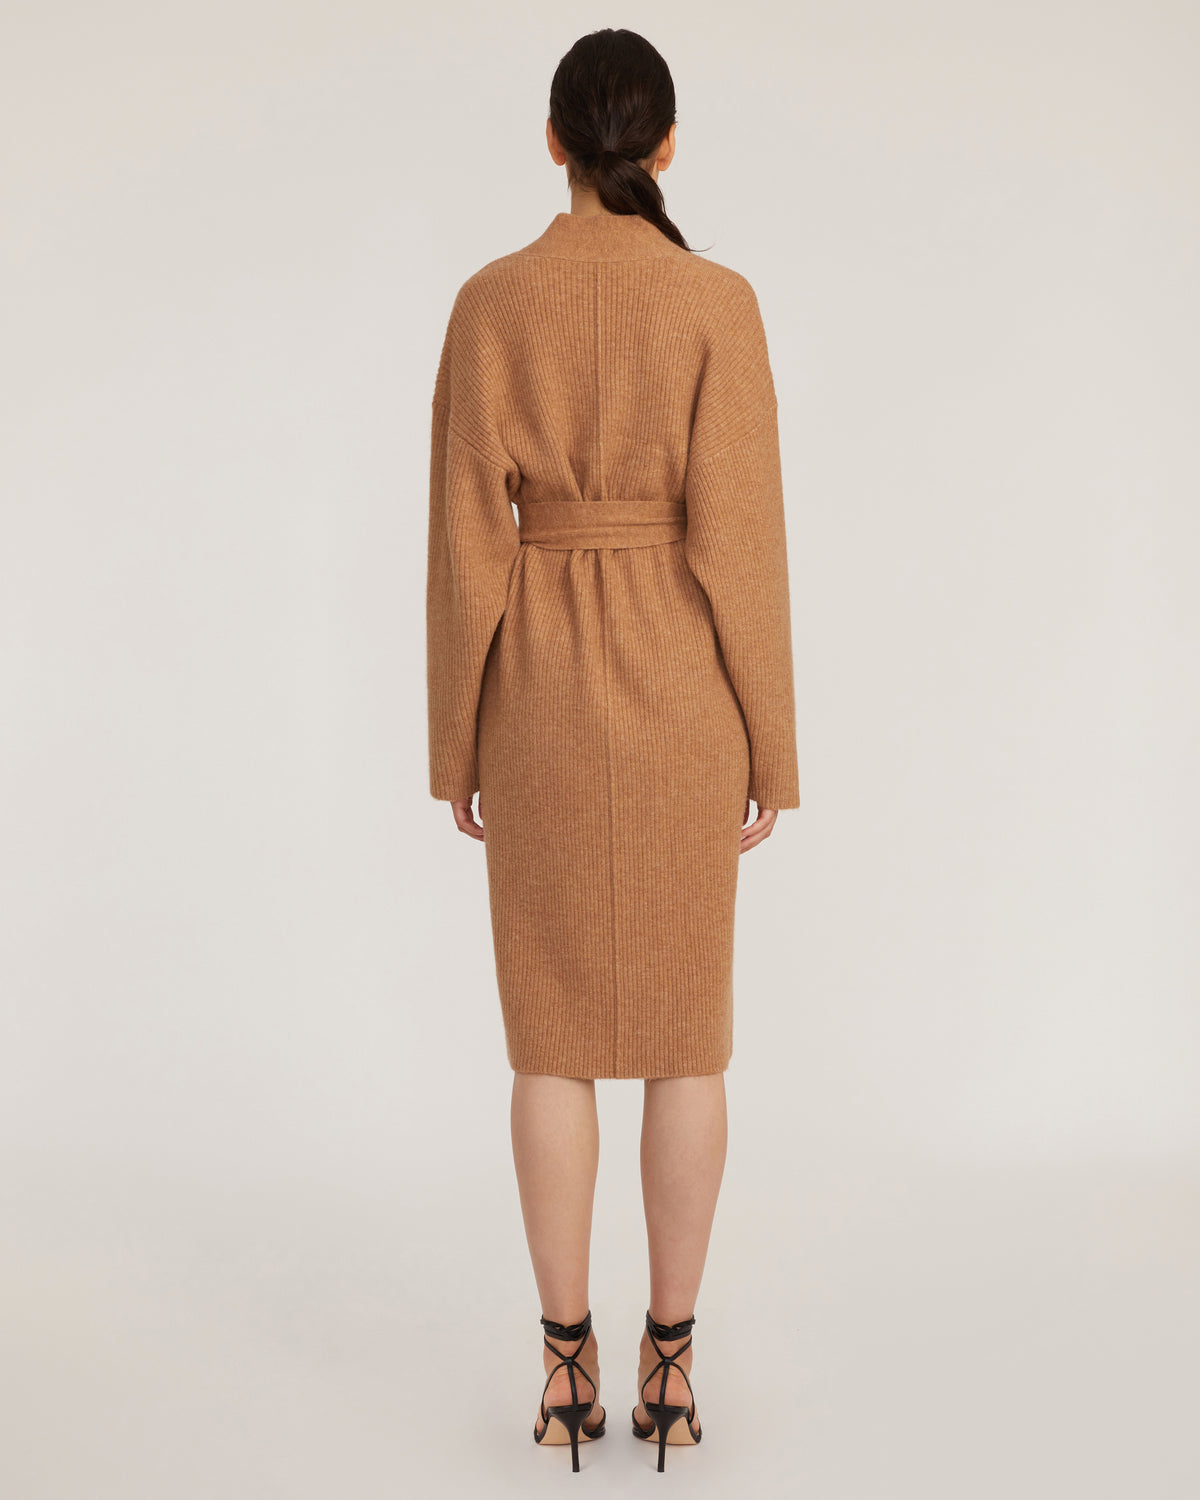 Kyrie Cashmere Blend Midi Cardigan in Camel